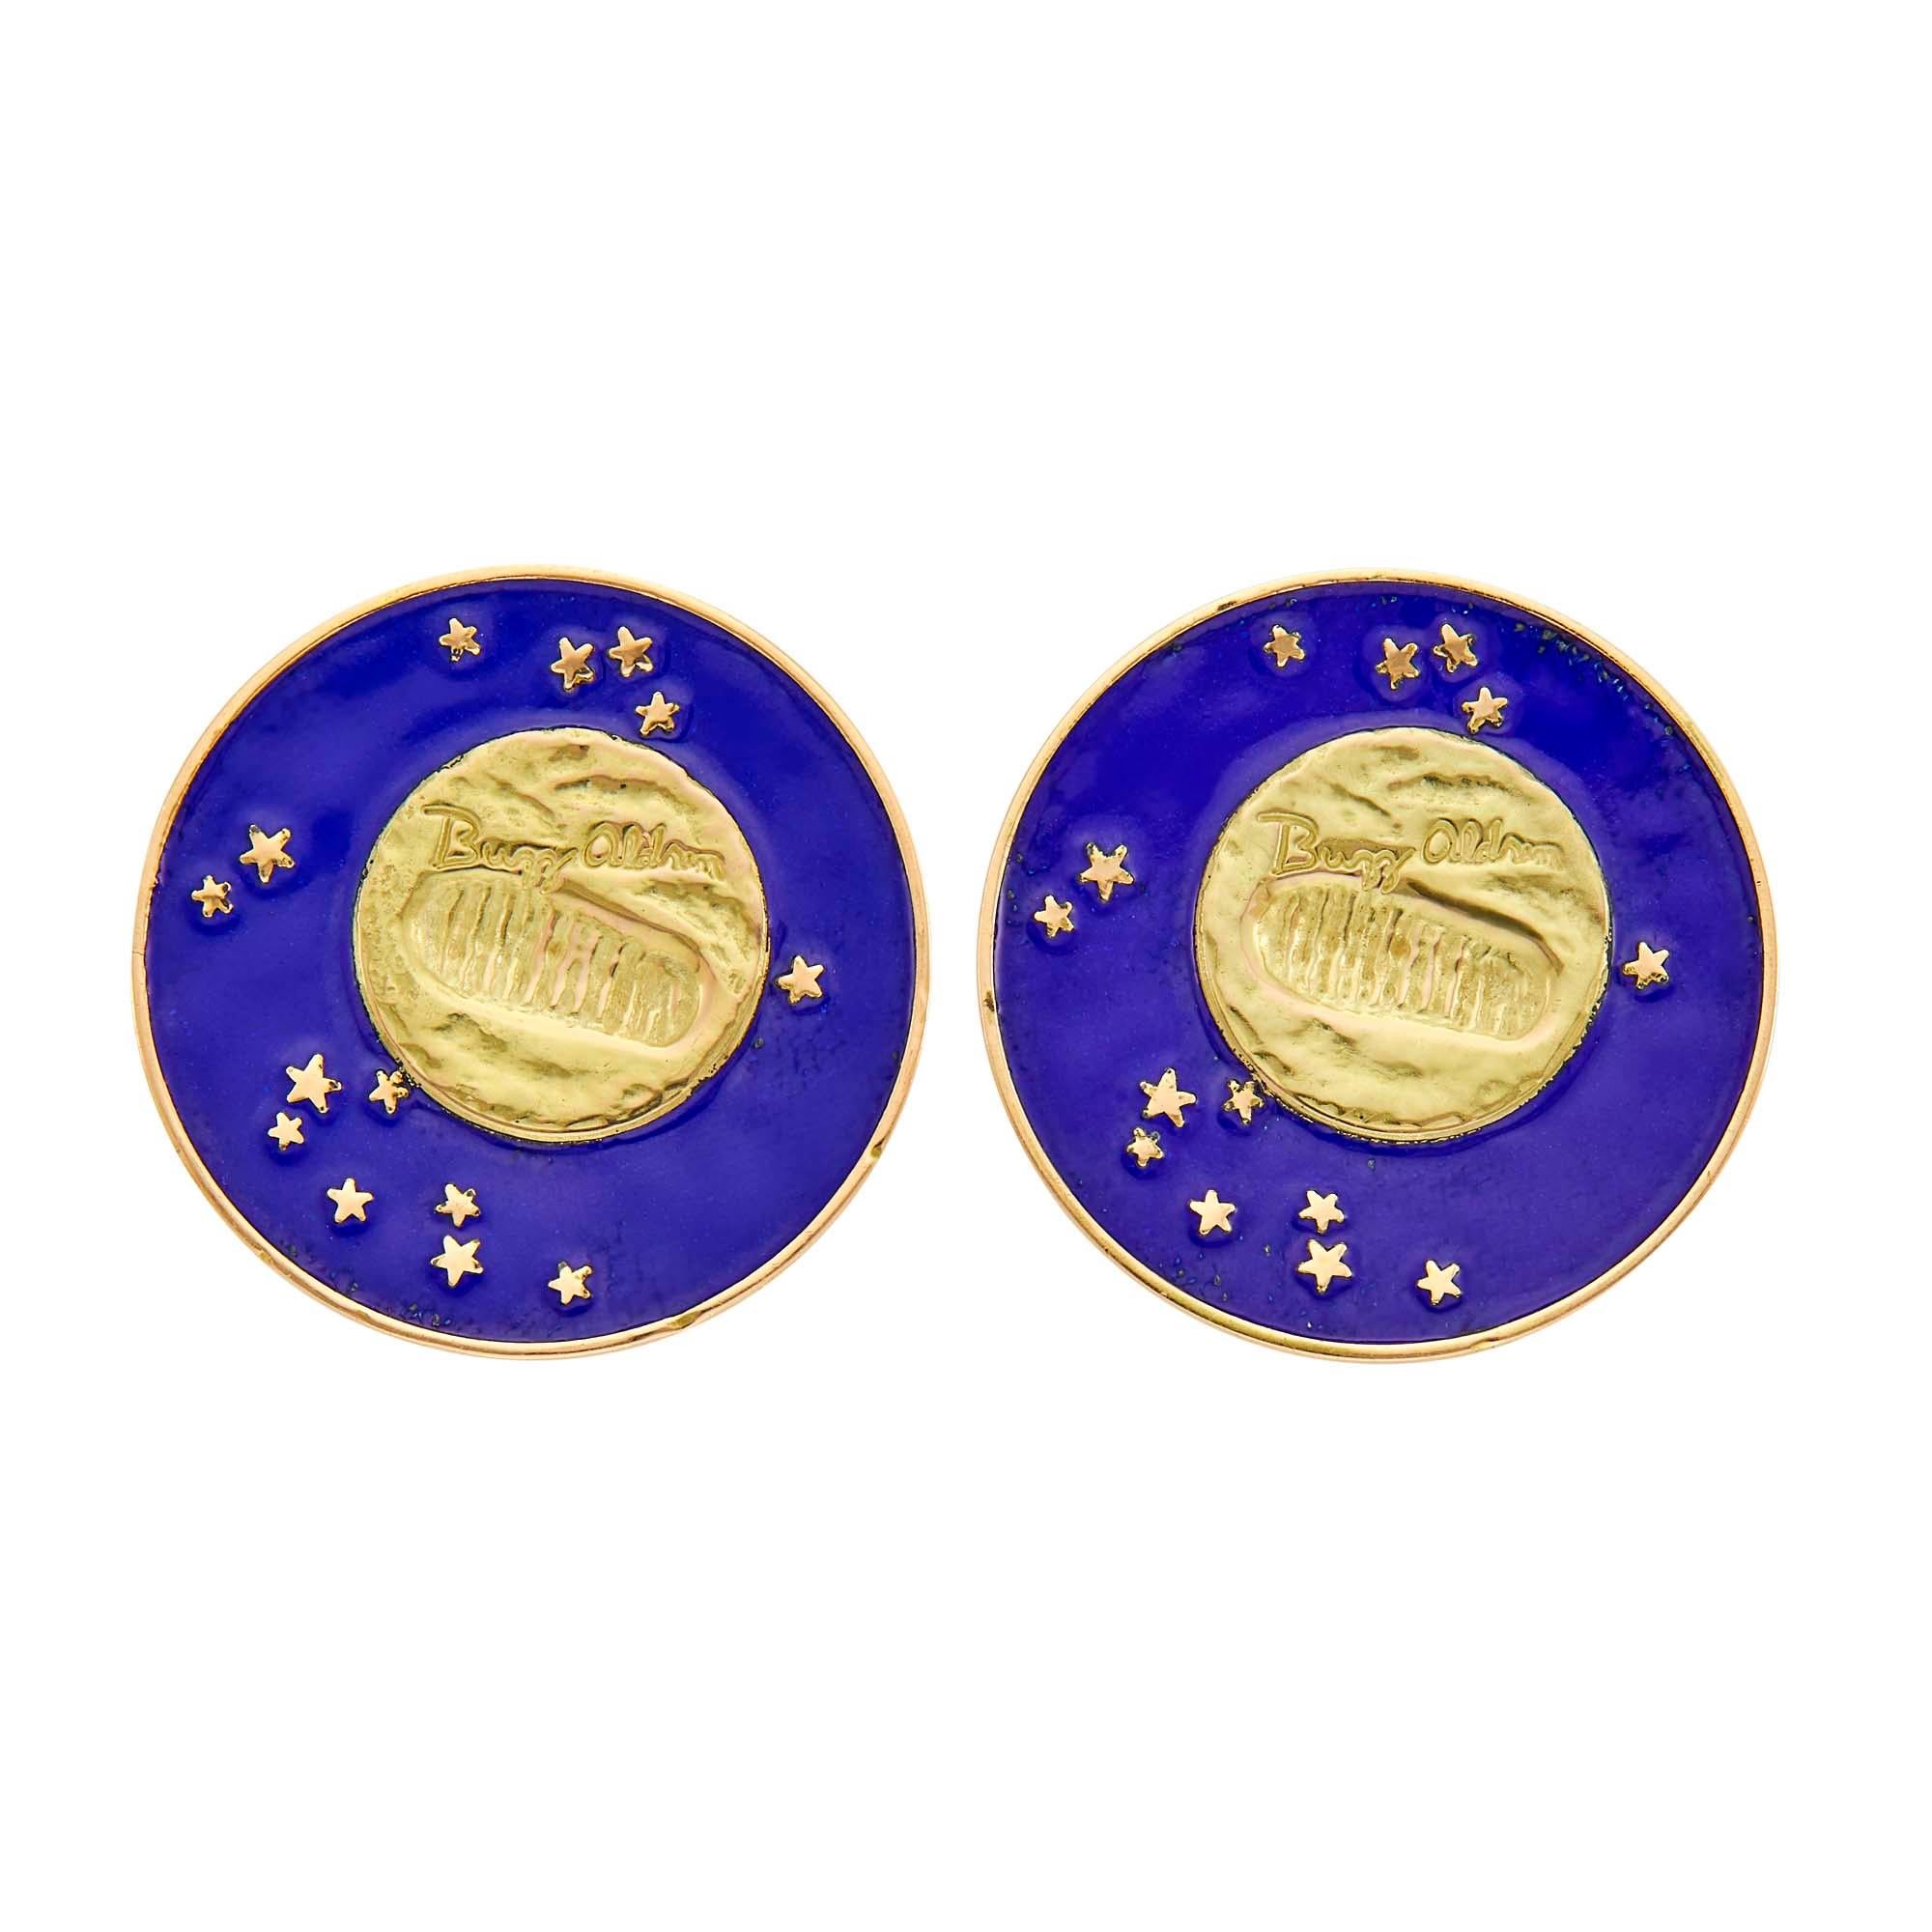 A fun pair of “Lunar Landing” earclips, each centering a commemorative coin with Buzz Aldrin’s signature and footprint in a circular frame of blue enamel and gold stars, signed Tiffany & Co.